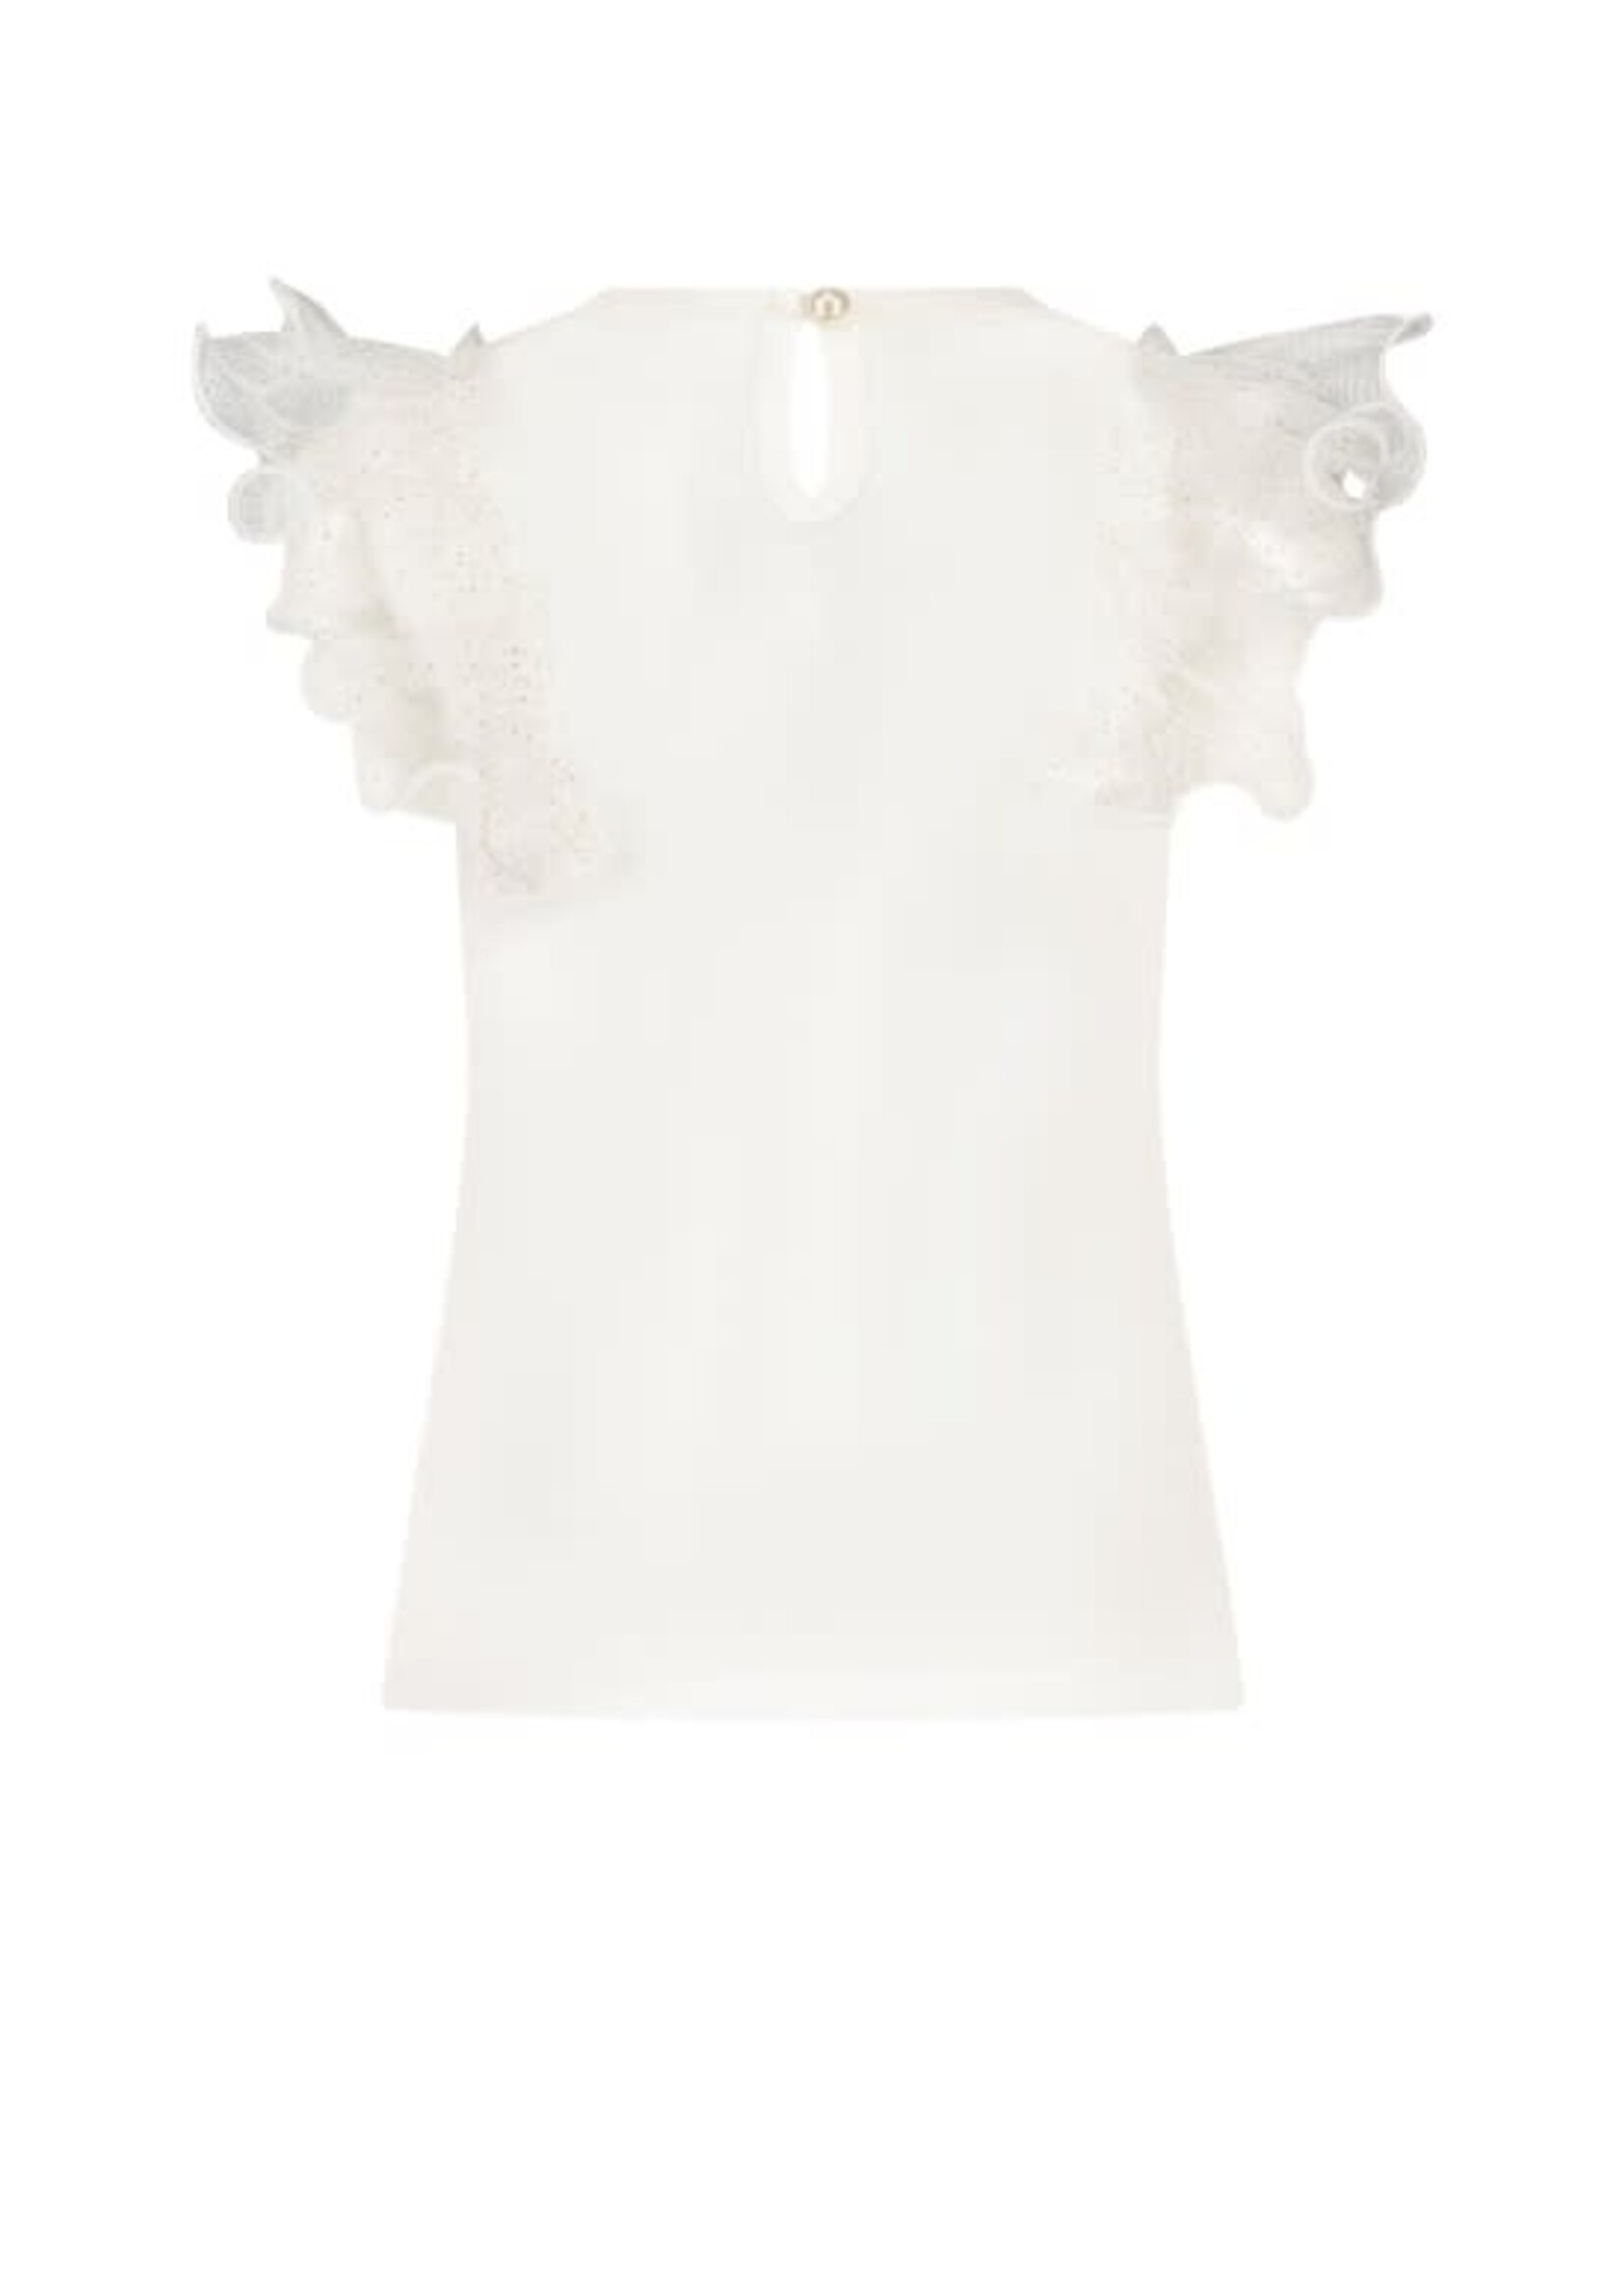 Le Chic Le Chic NOBLY sparkly net T-shirt C312-7402 Off White